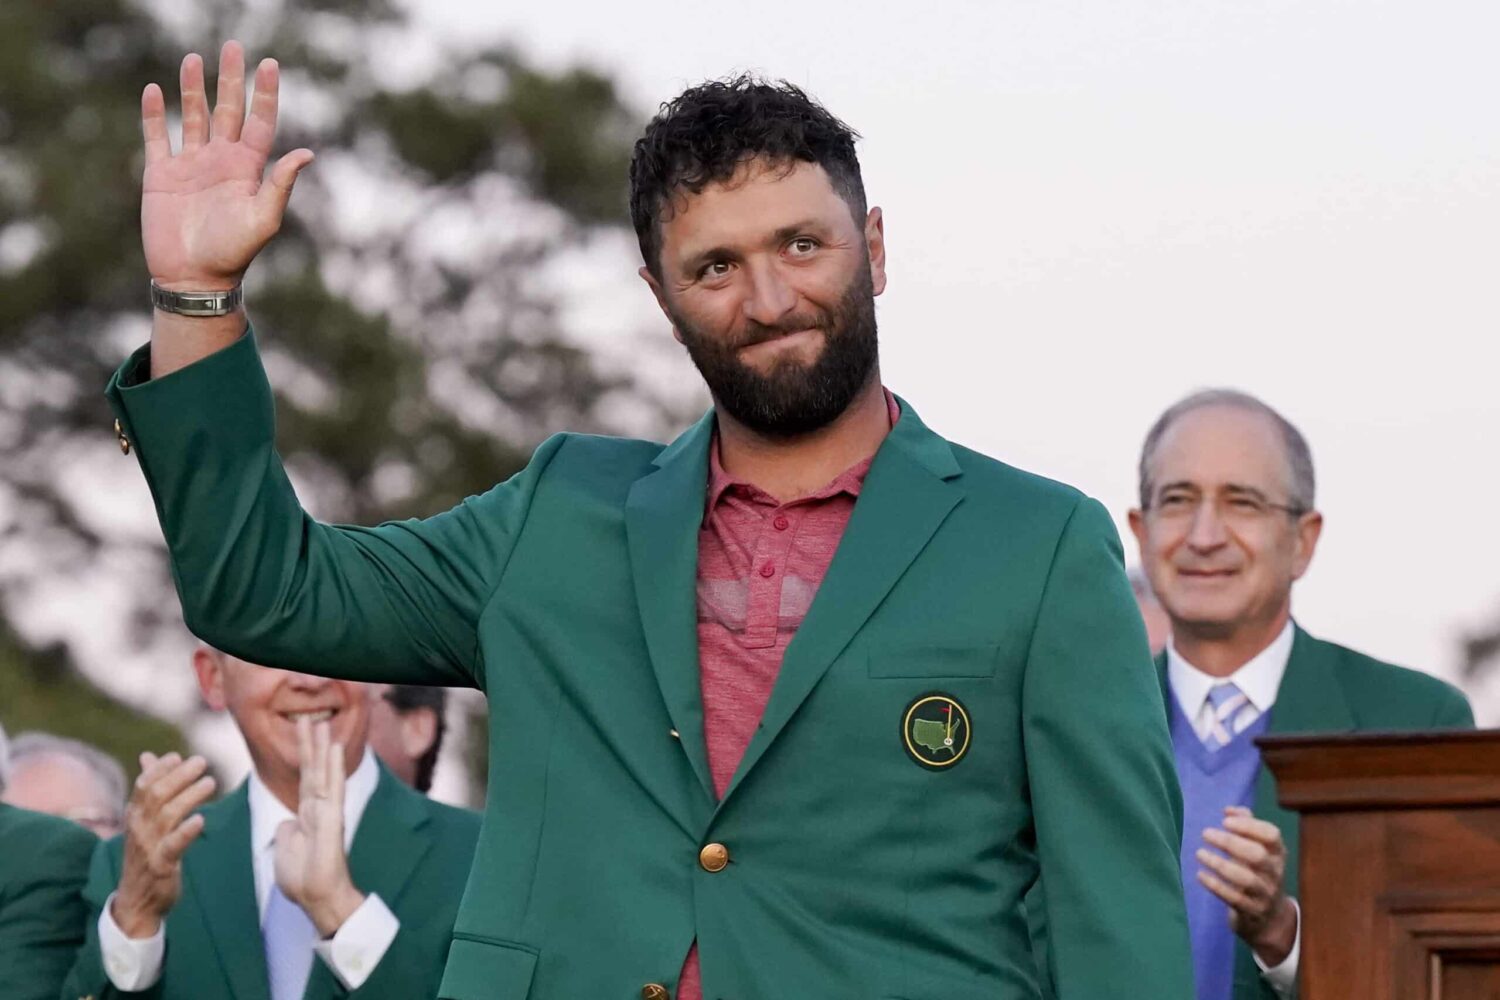 Jon Rahm waves to the crowd after donning his green jacket after winning The Masters golf tournament.